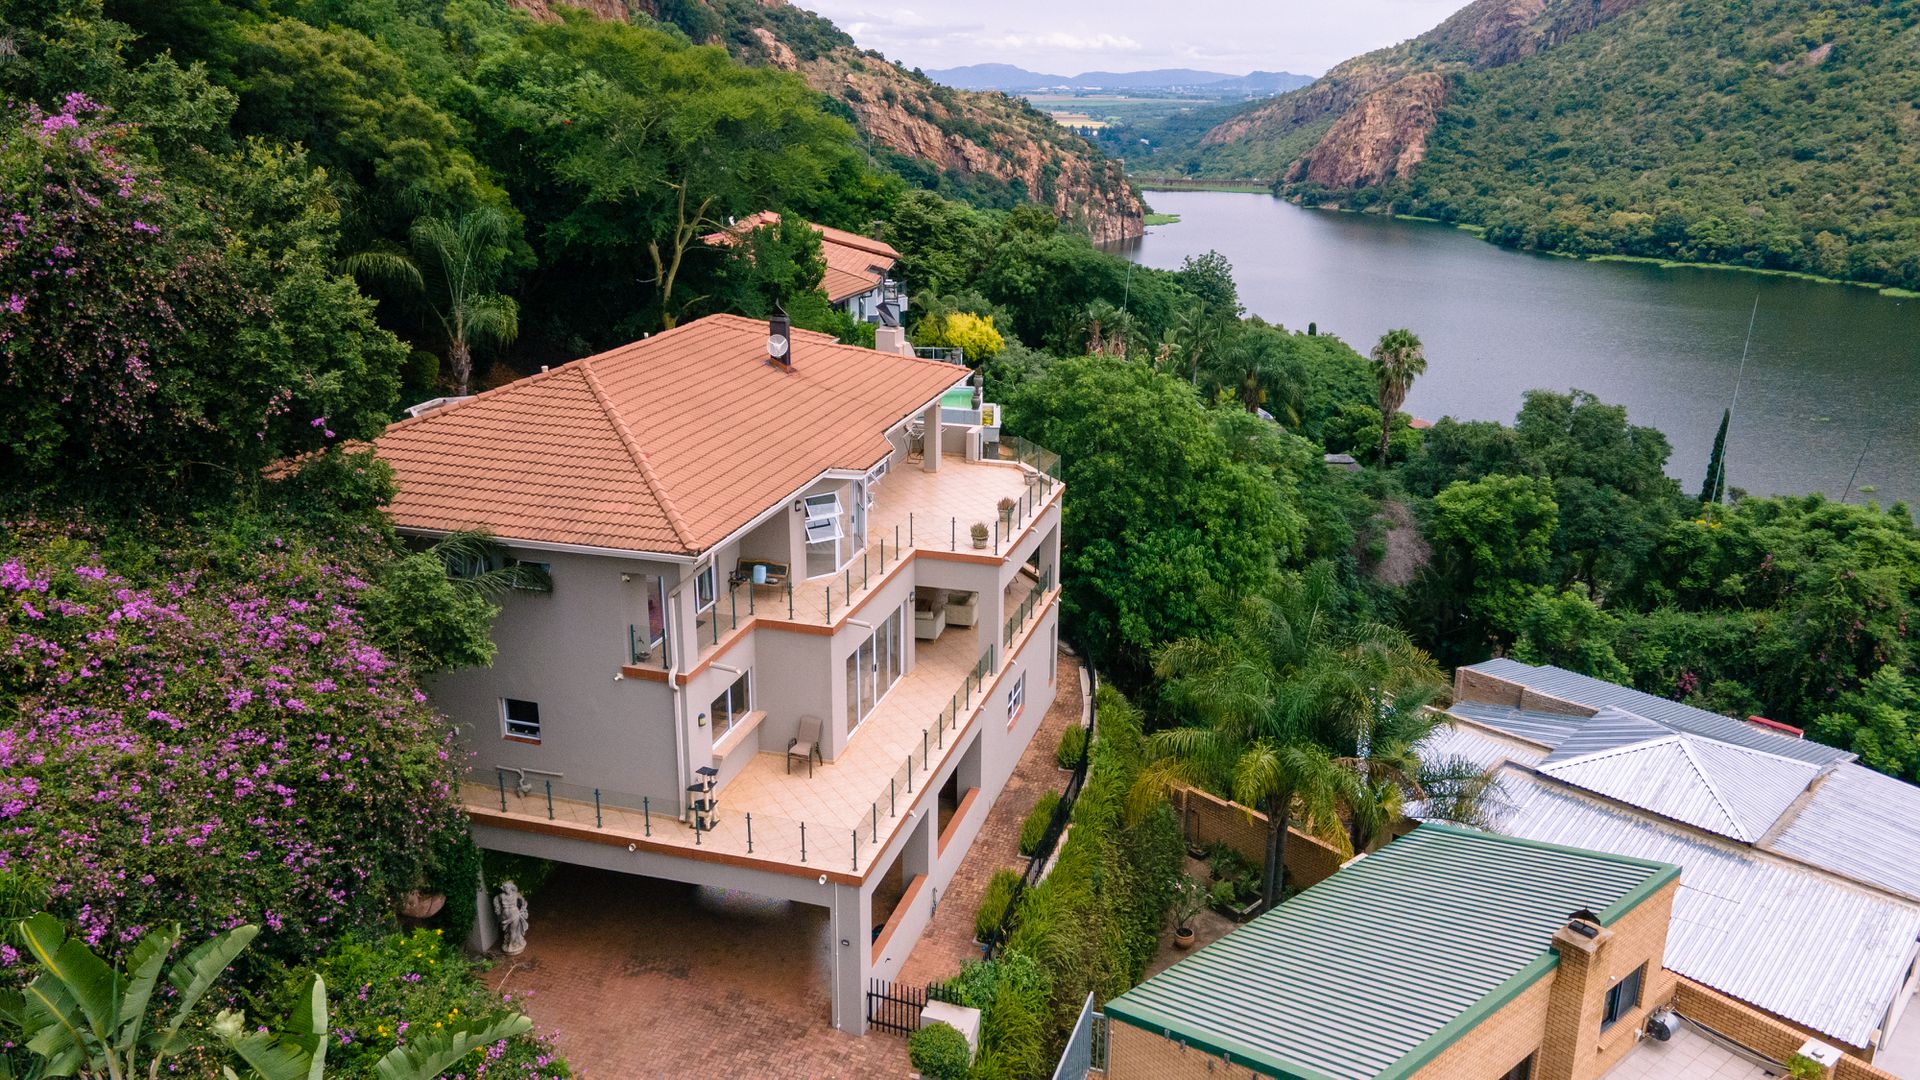 House in Kosmos - Gorgeous views of the dam and surrounds, right to the tunnel and bridge across the dam wall!